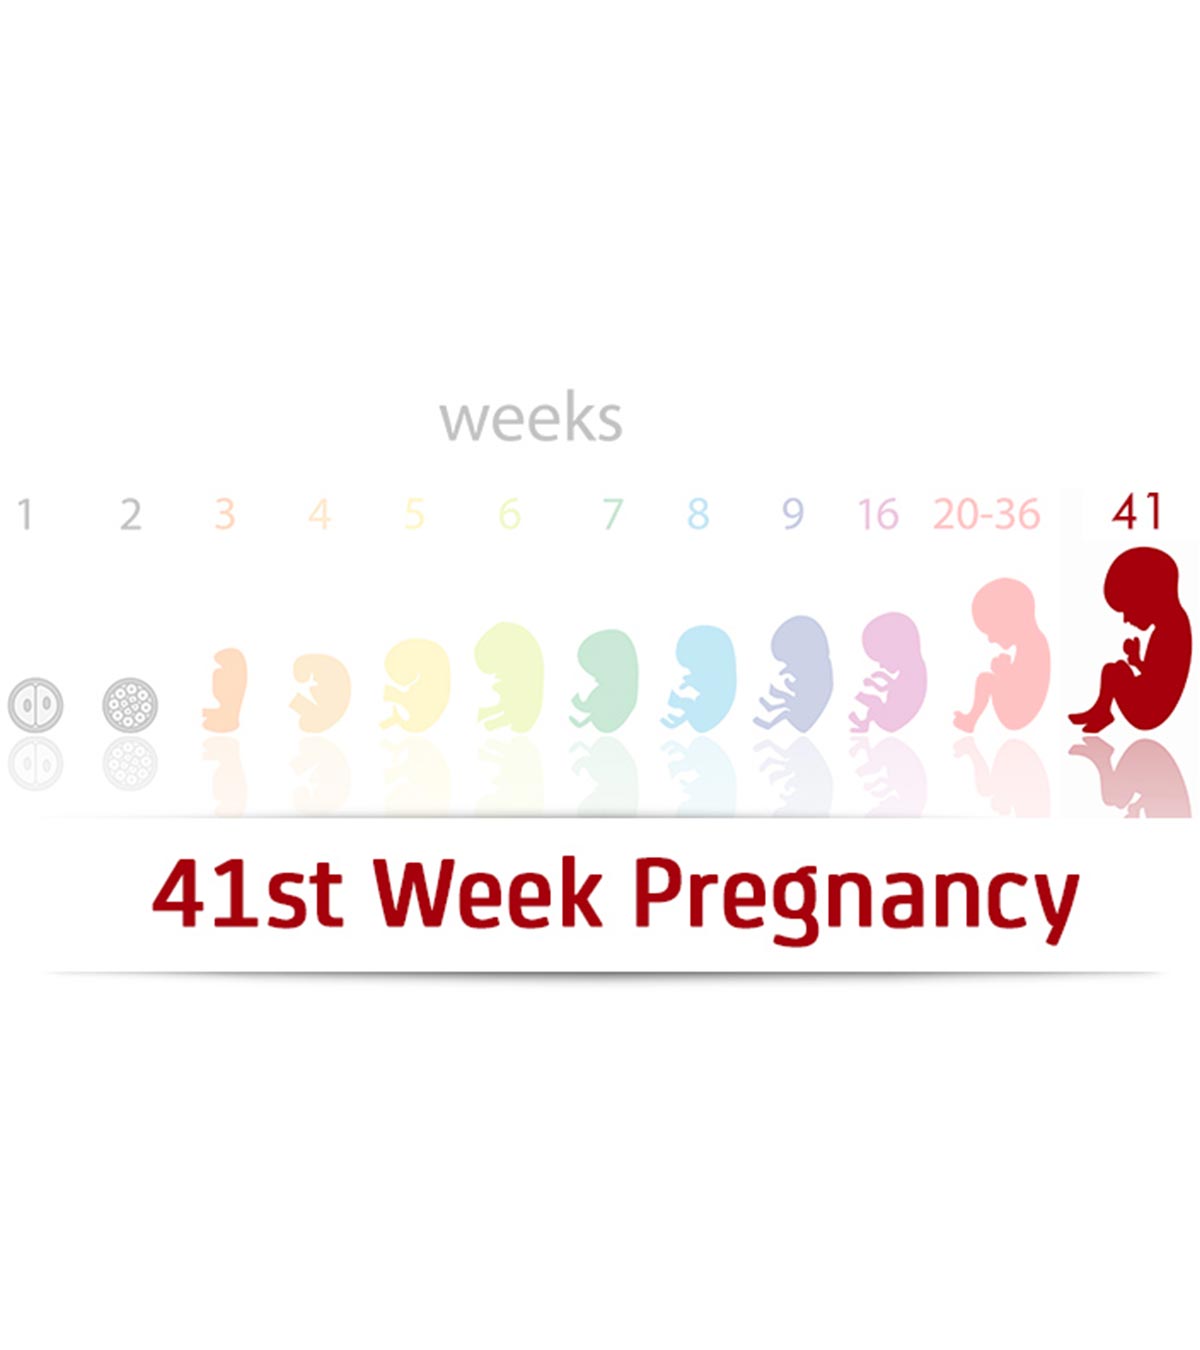 Baby growth on the 41st week of pregnancy